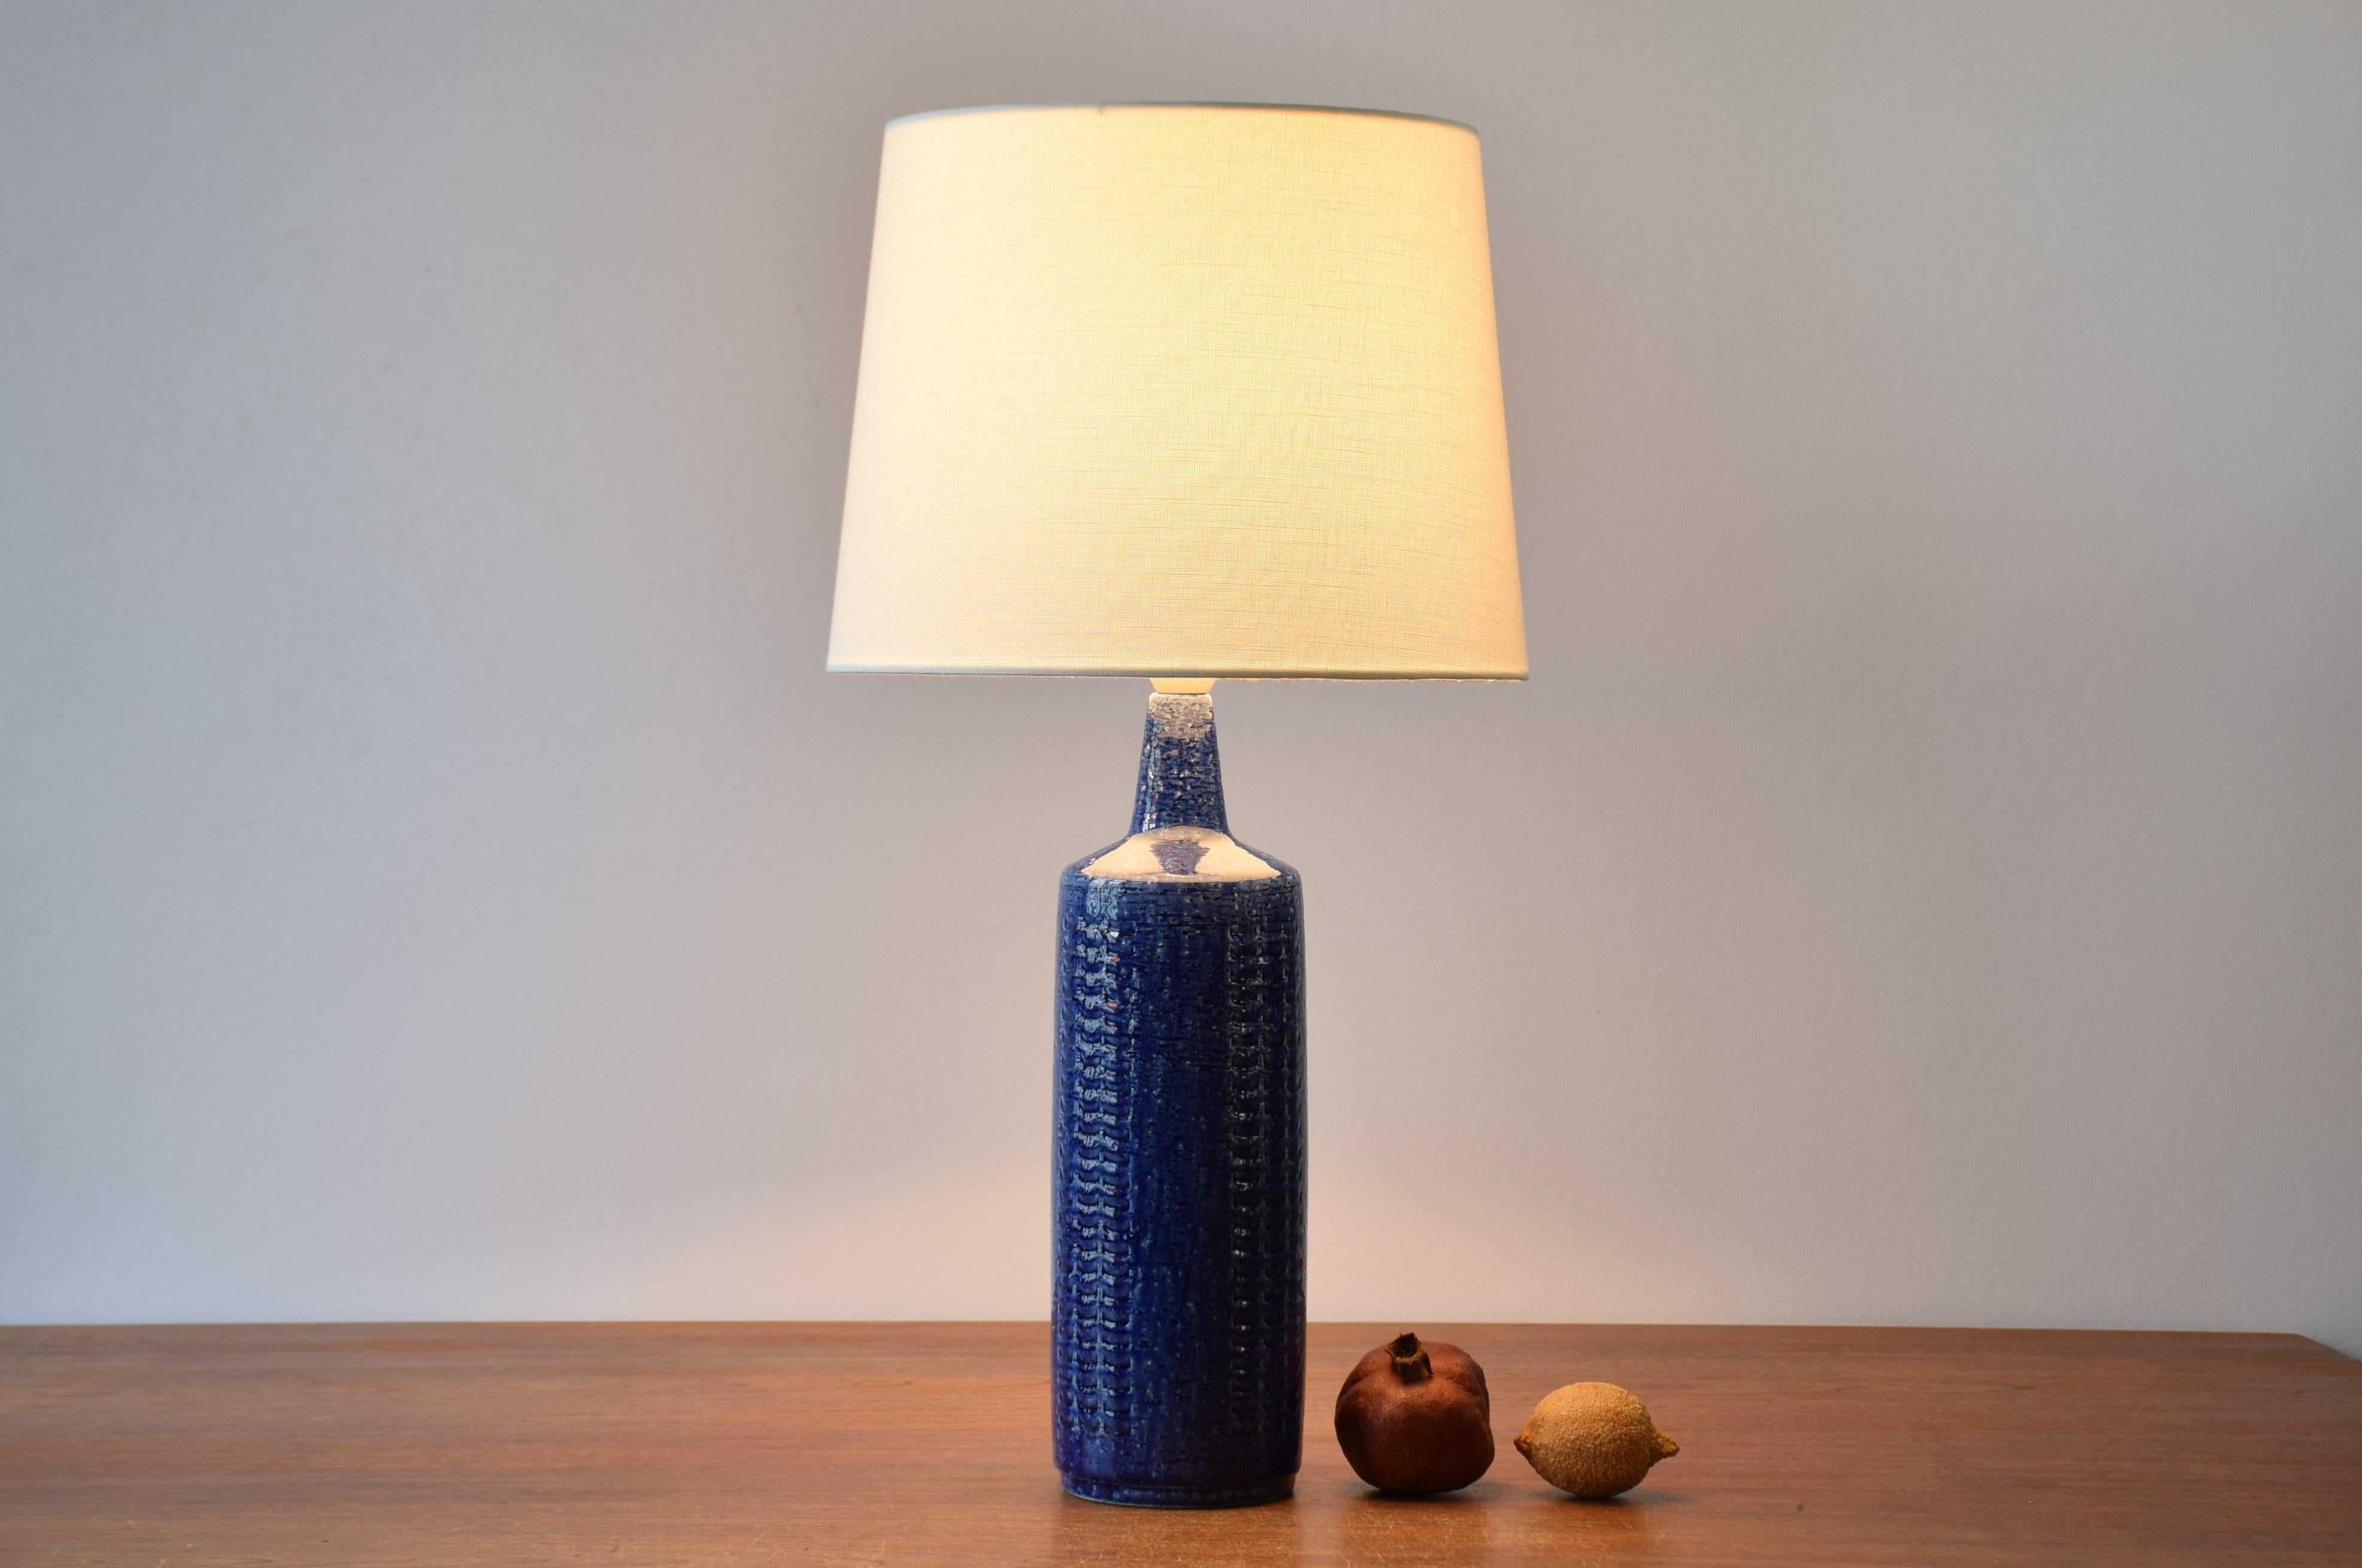 Tall Mid-Century Modern table lamp from the Danish ceramic workshop Palshus.
It was designed by Per Linnemann-Schmidt and made circa 1960s or early 1970s.
It is made with chamotte clay which gives a rough and vivid surface decorated with cobalt